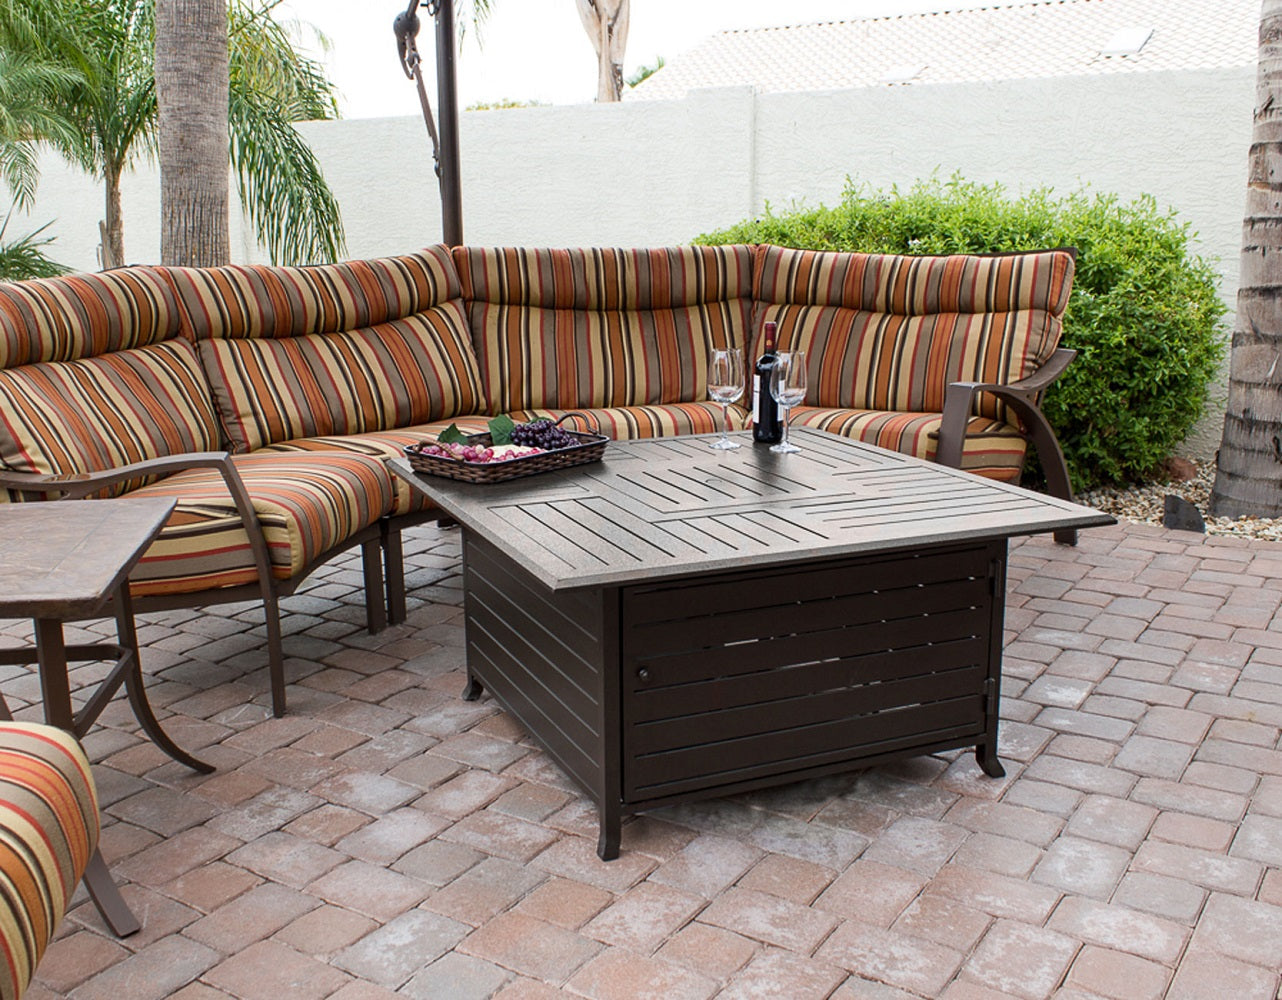 Hiland Square Extruded Aluminum Firepit with Lid-F-1108-FPT- Lifestyle Patio